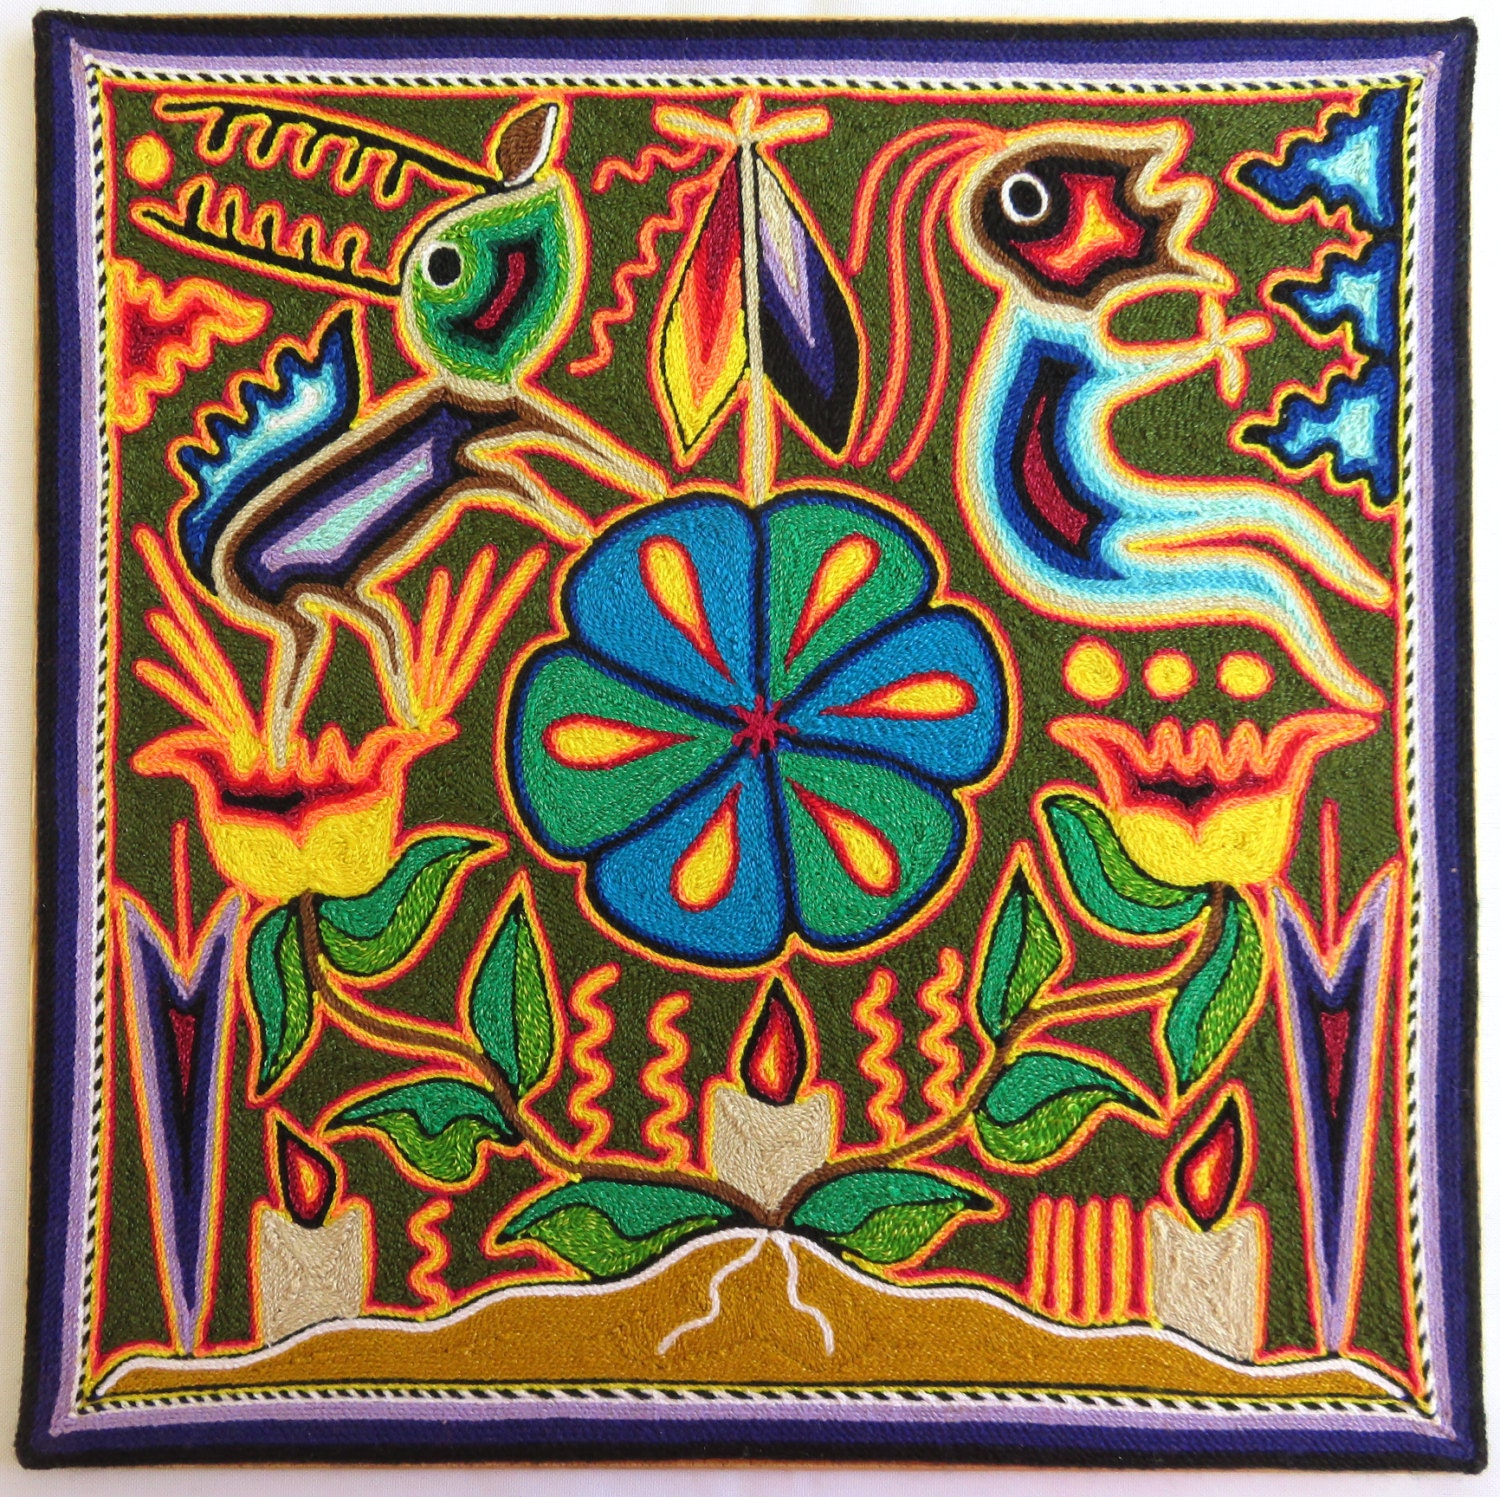 12 Huichol yarn painting 30-002 H Mexican painting